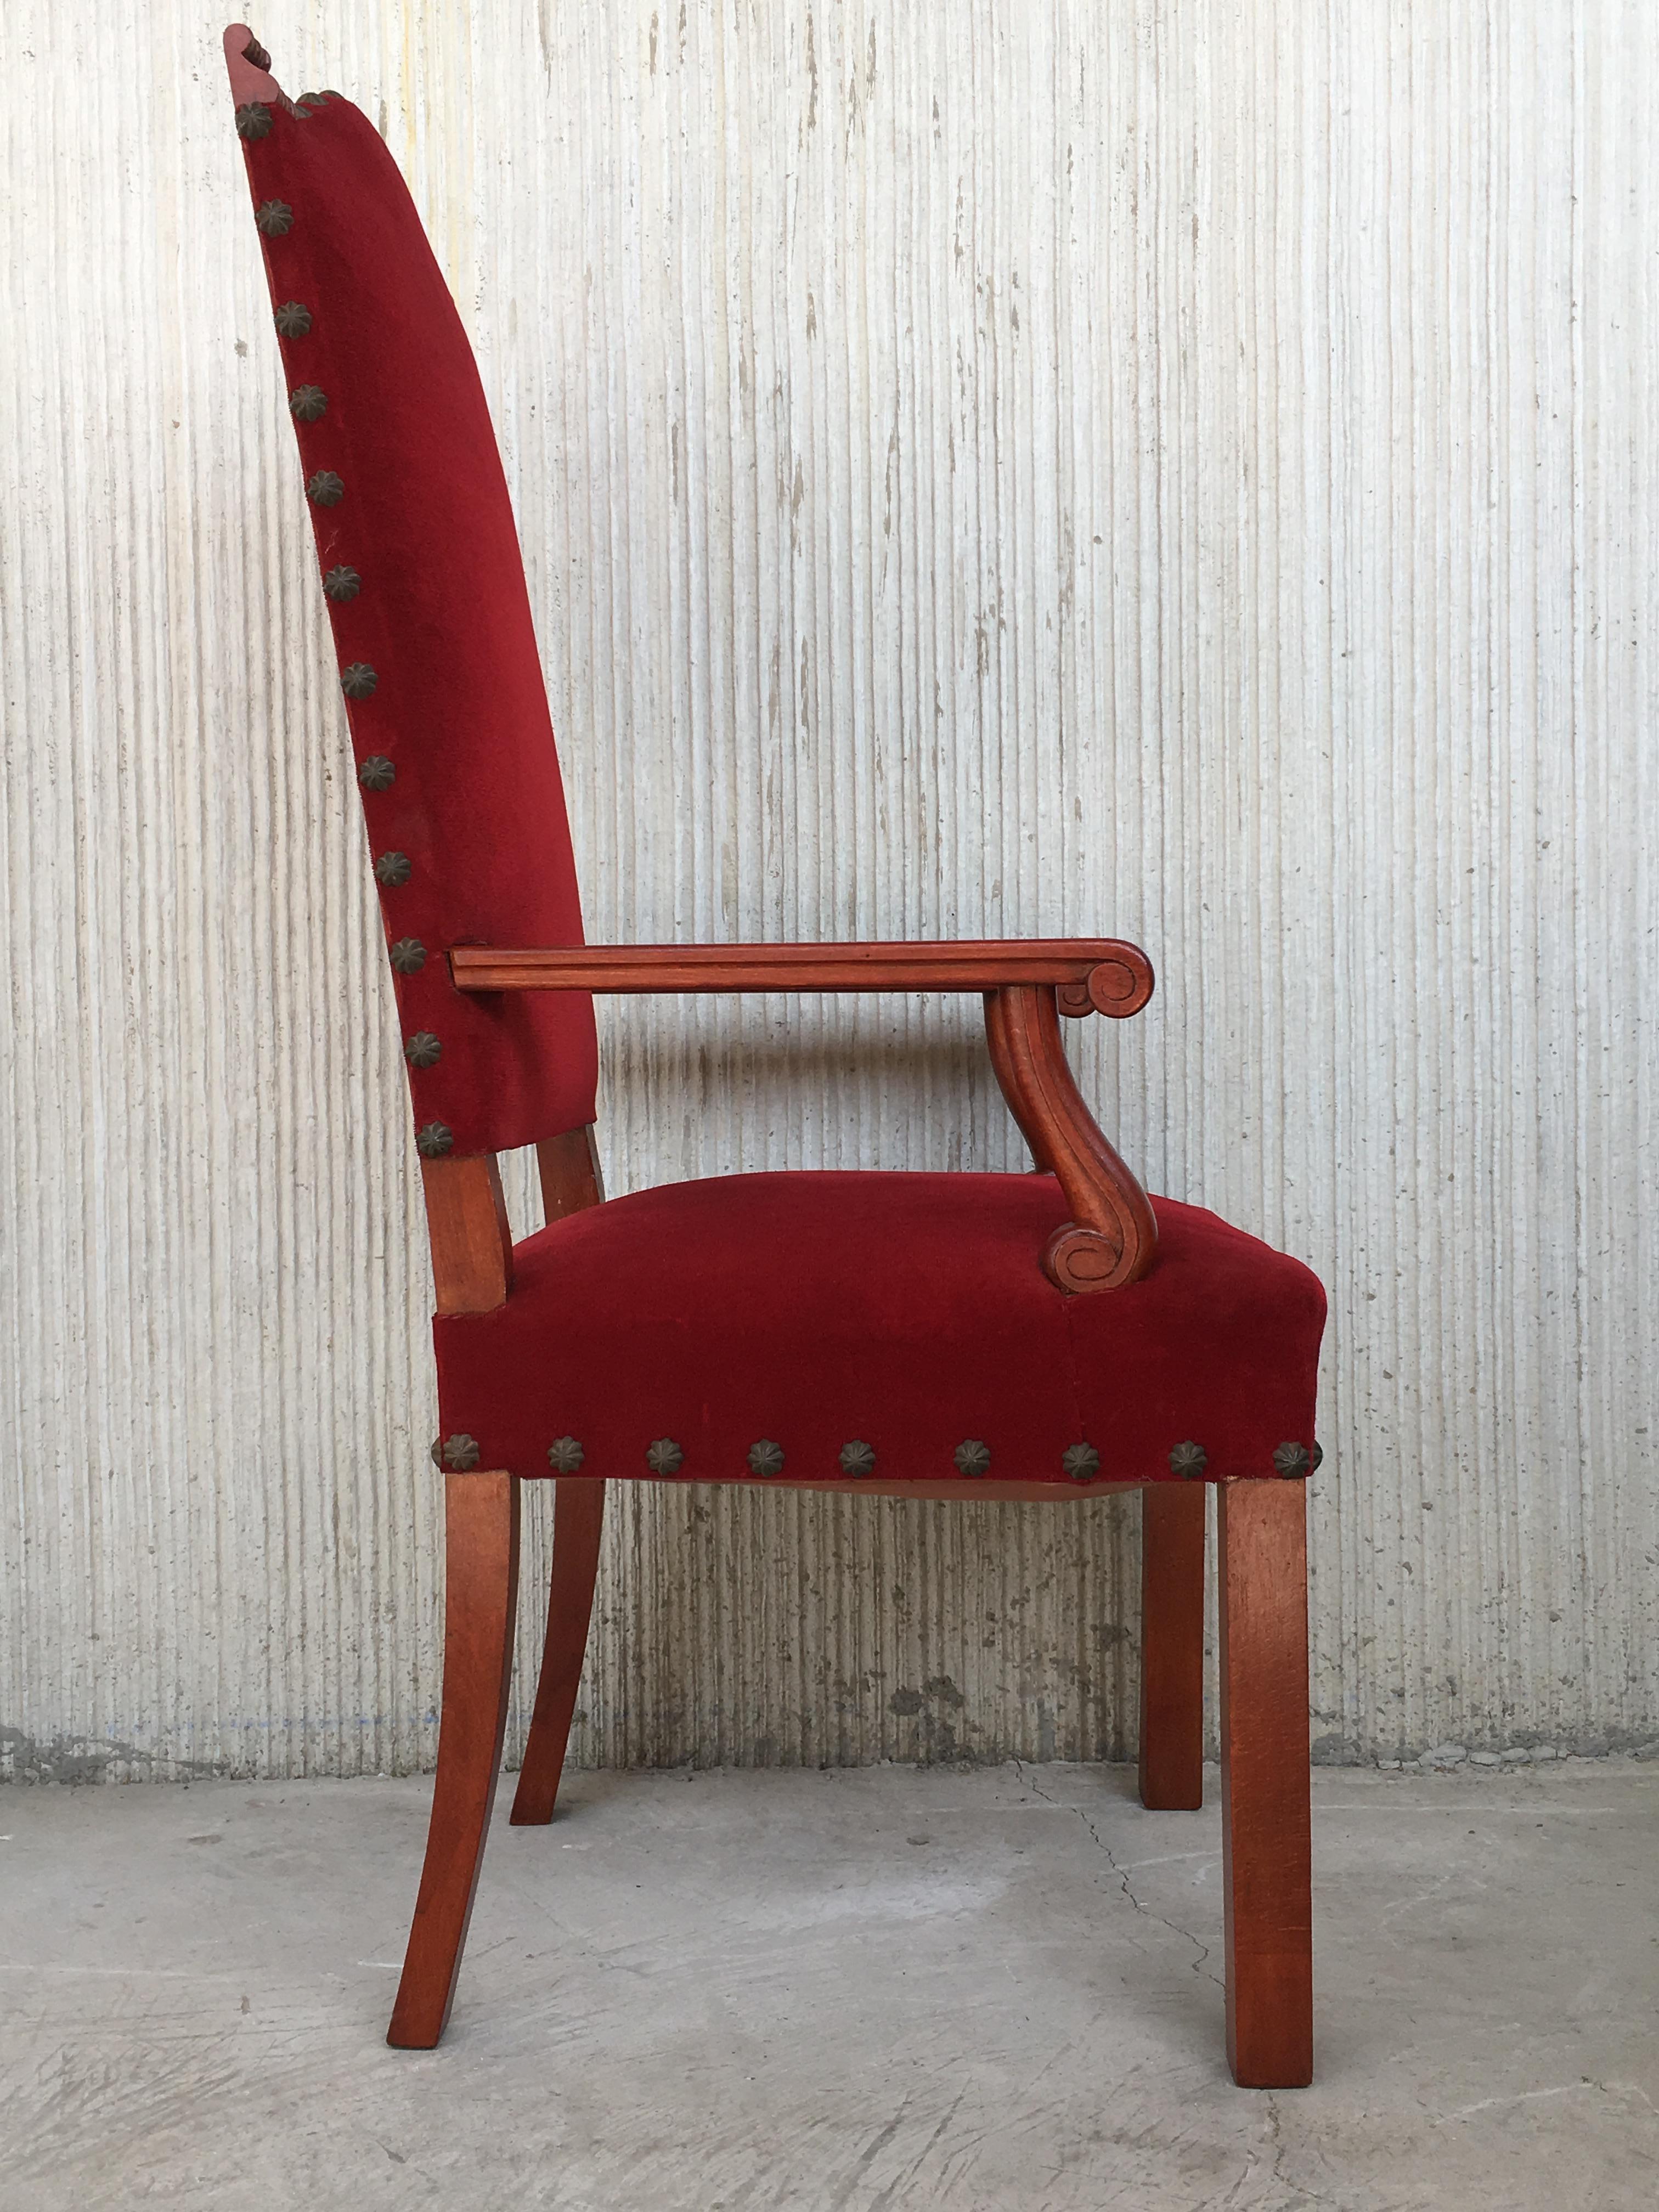 19th Century Spanish Revival High Back Armchair with Red Velvet Upholstery In Excellent Condition For Sale In Miami, FL